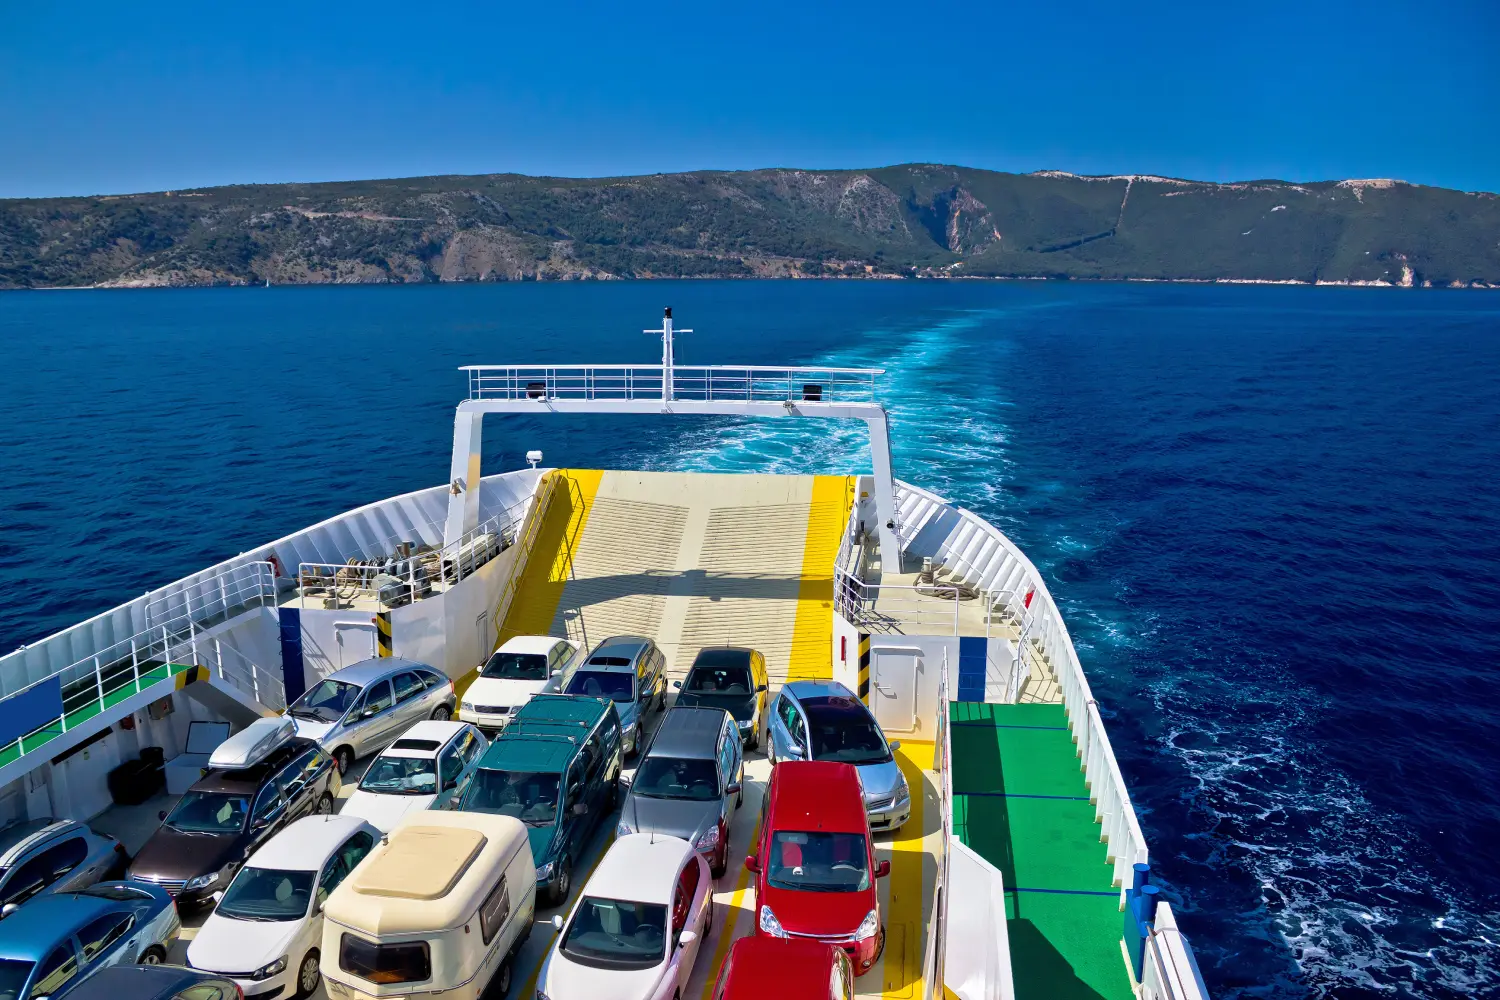 Camping on board Greece - open deck for camping in your vehicle